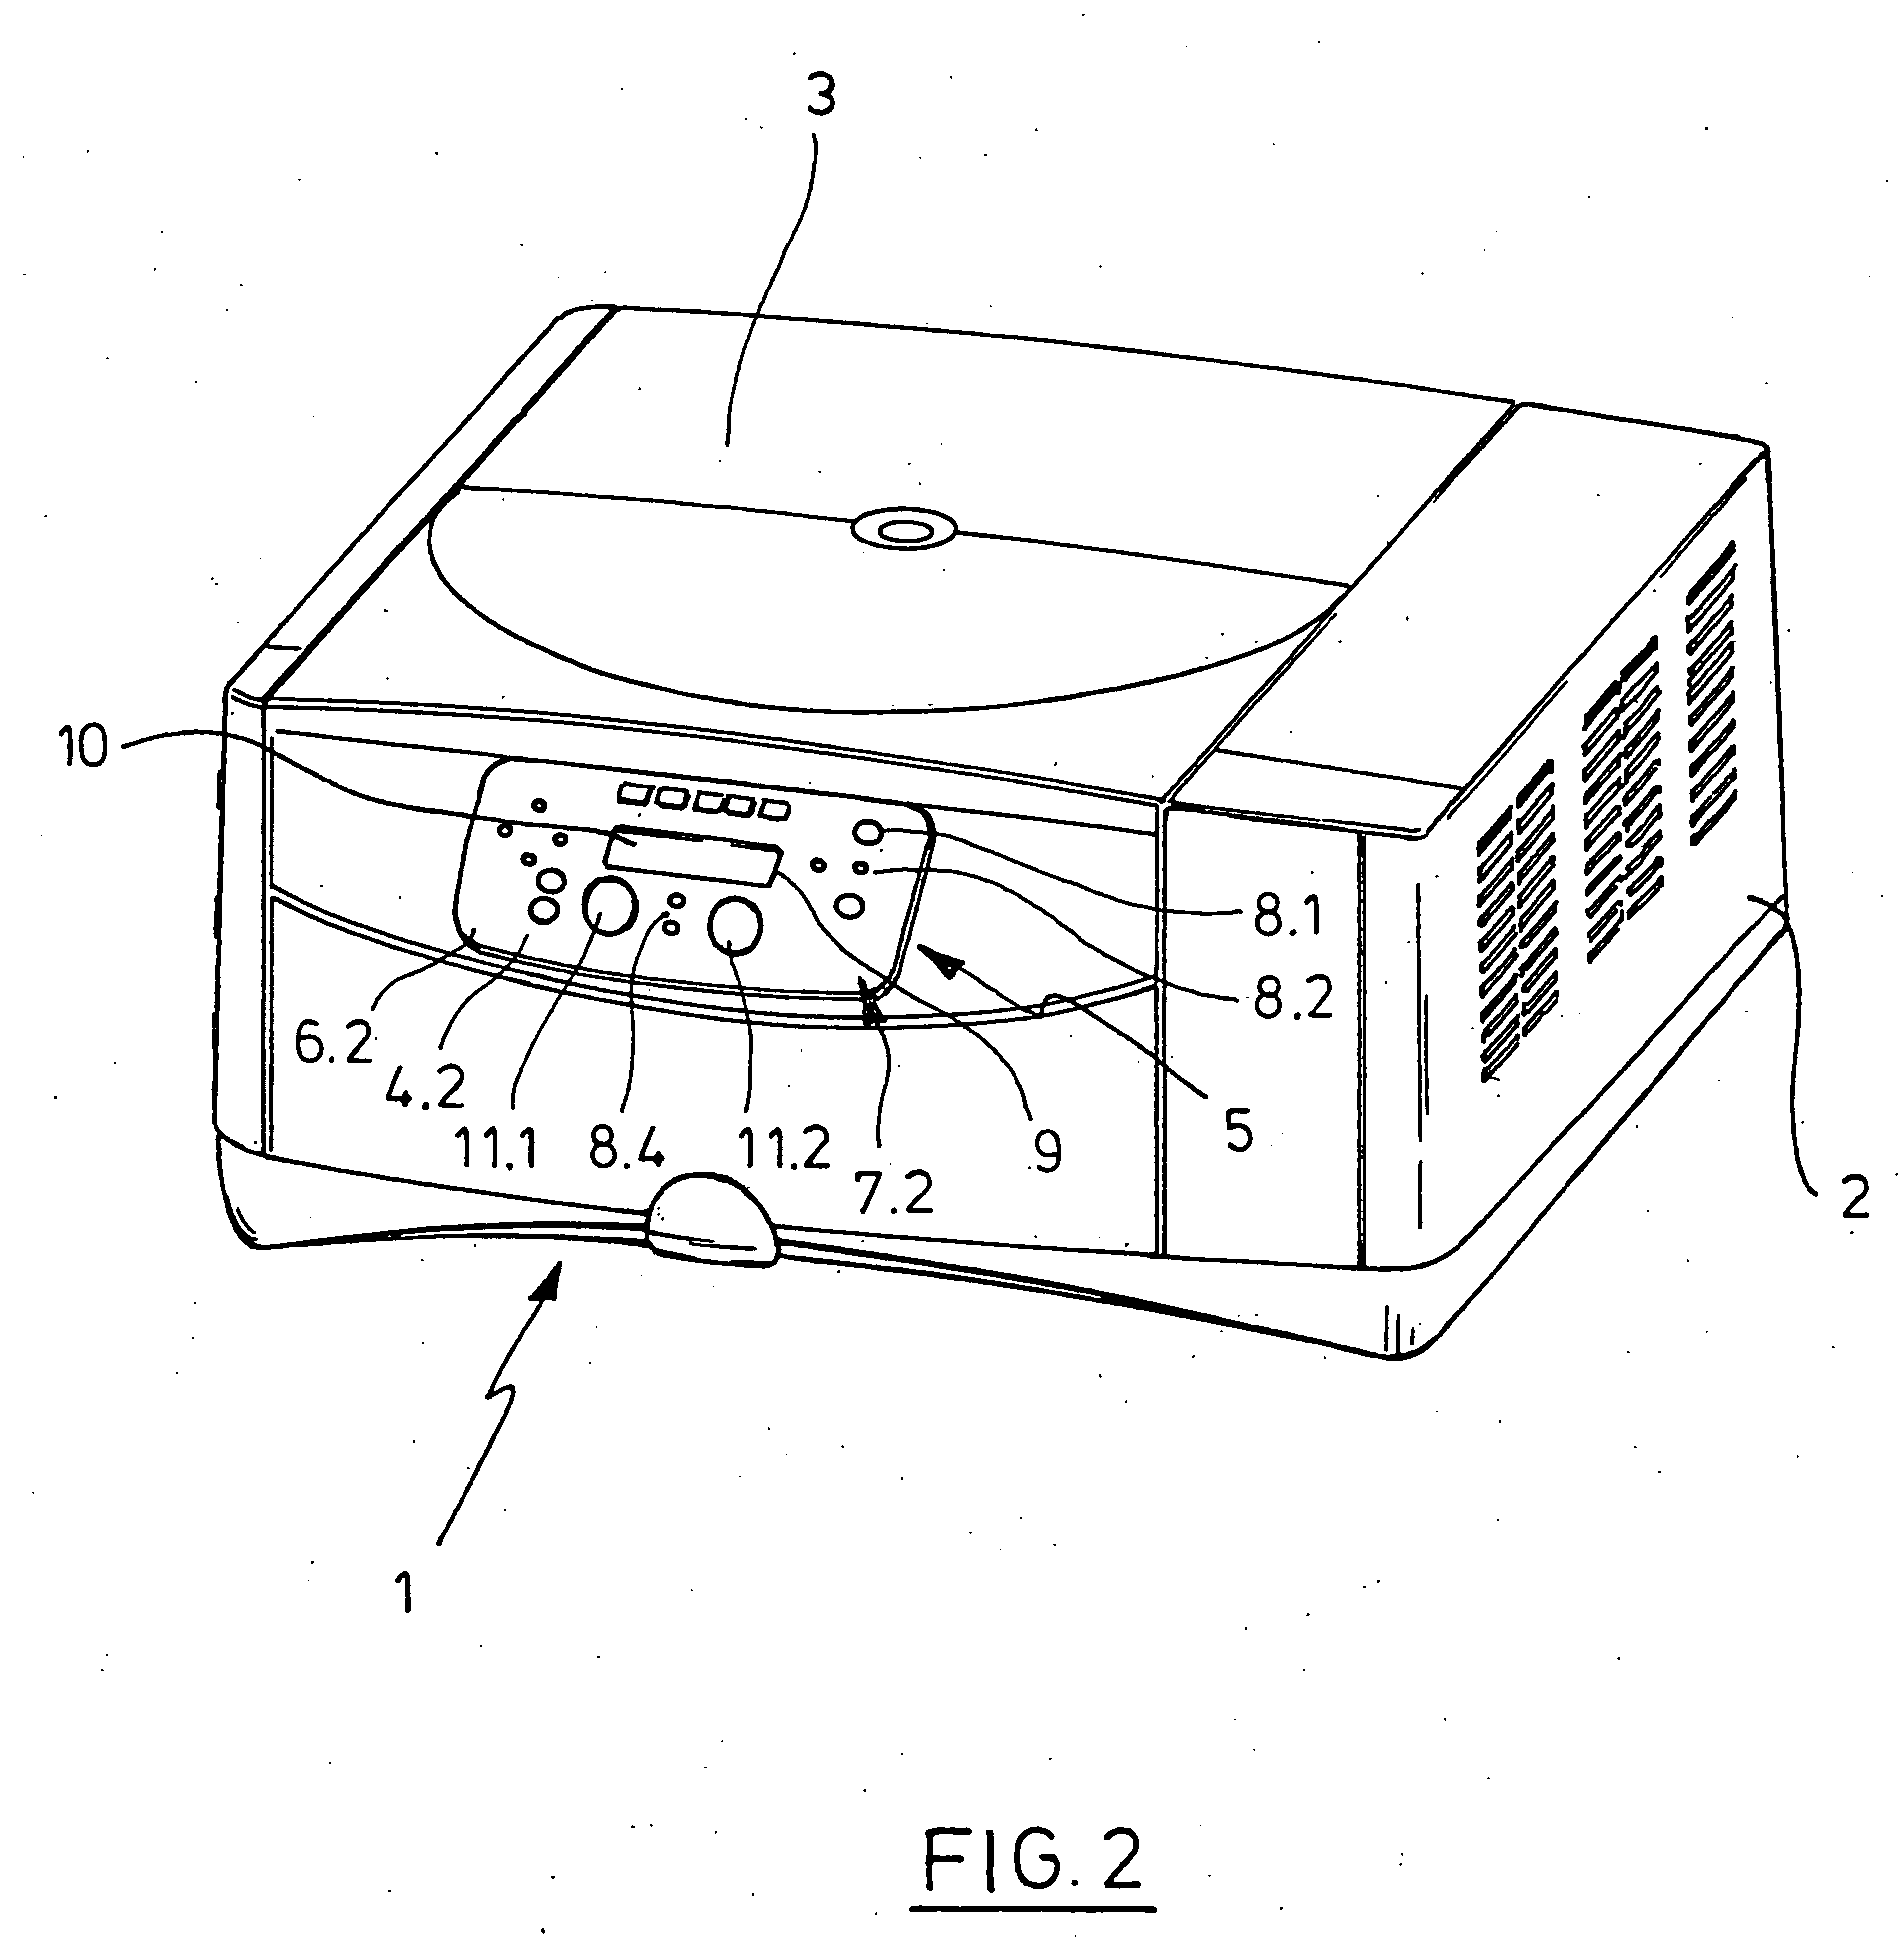 Laboratory apparatus with a control device